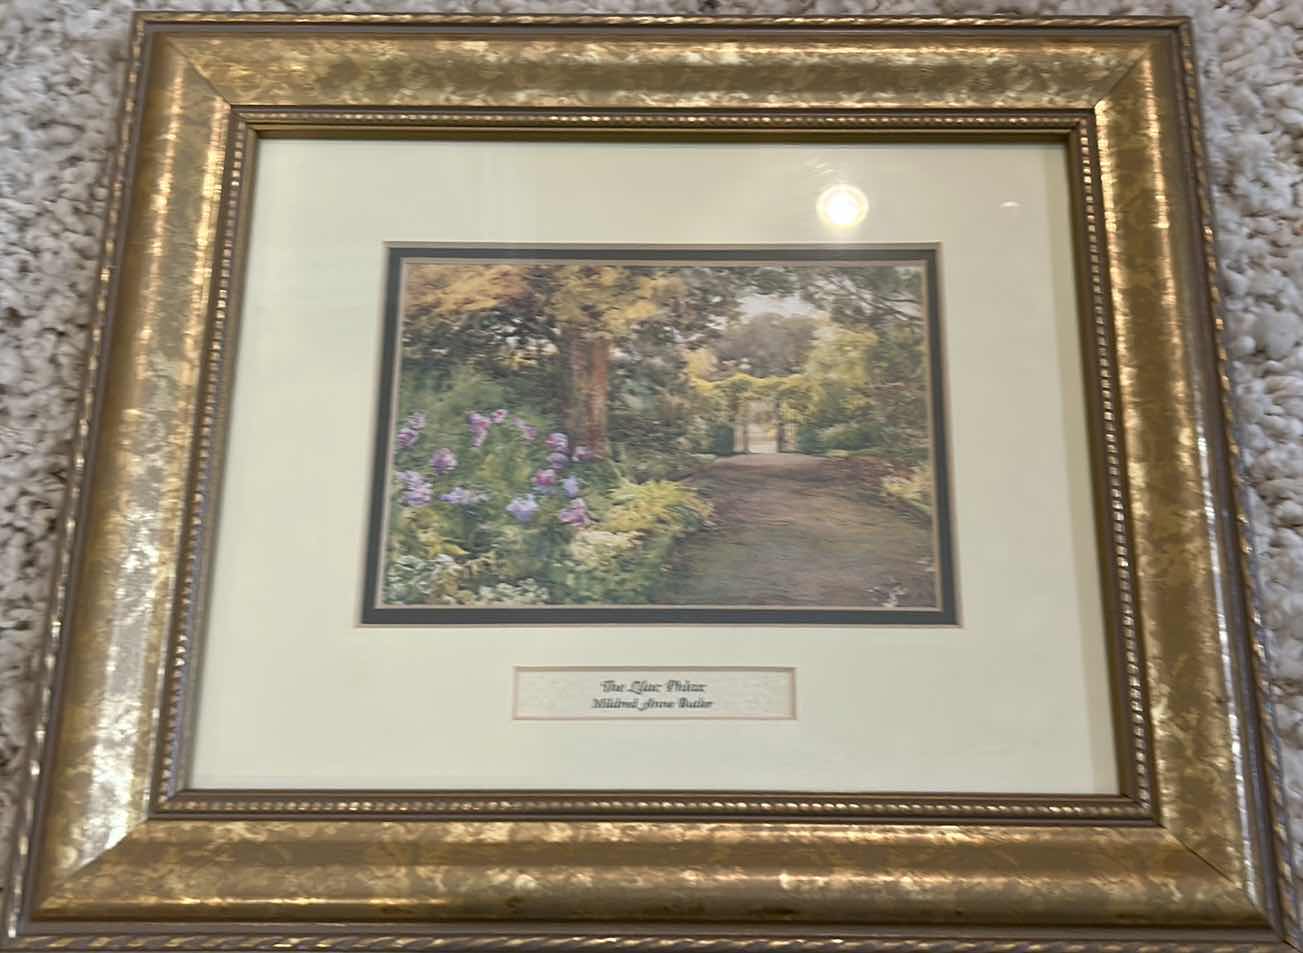 Photo 4 of “THE LILAC PHLAX” BY MILDRED ANNE BUTLER SIGNED ARTWORK, FRAMED 12 3/4” x 11”